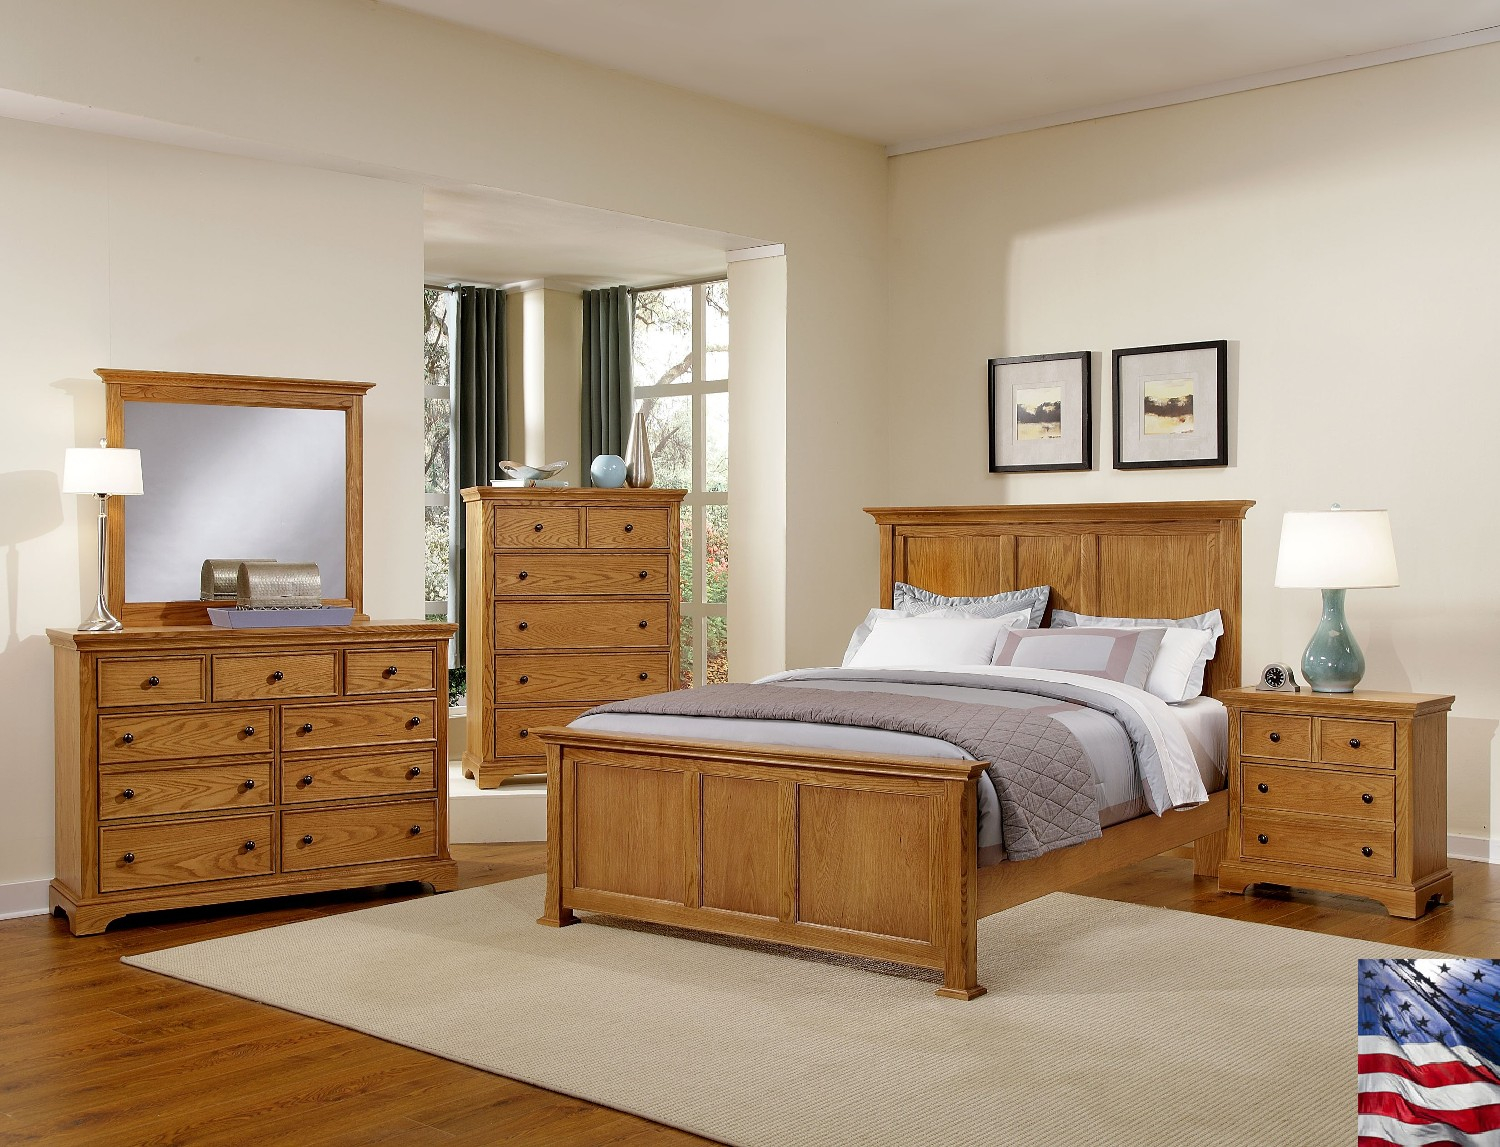 Bedroom Colors With Wood Furniture Eo Furniture intended for dimensions 1500 X 1147